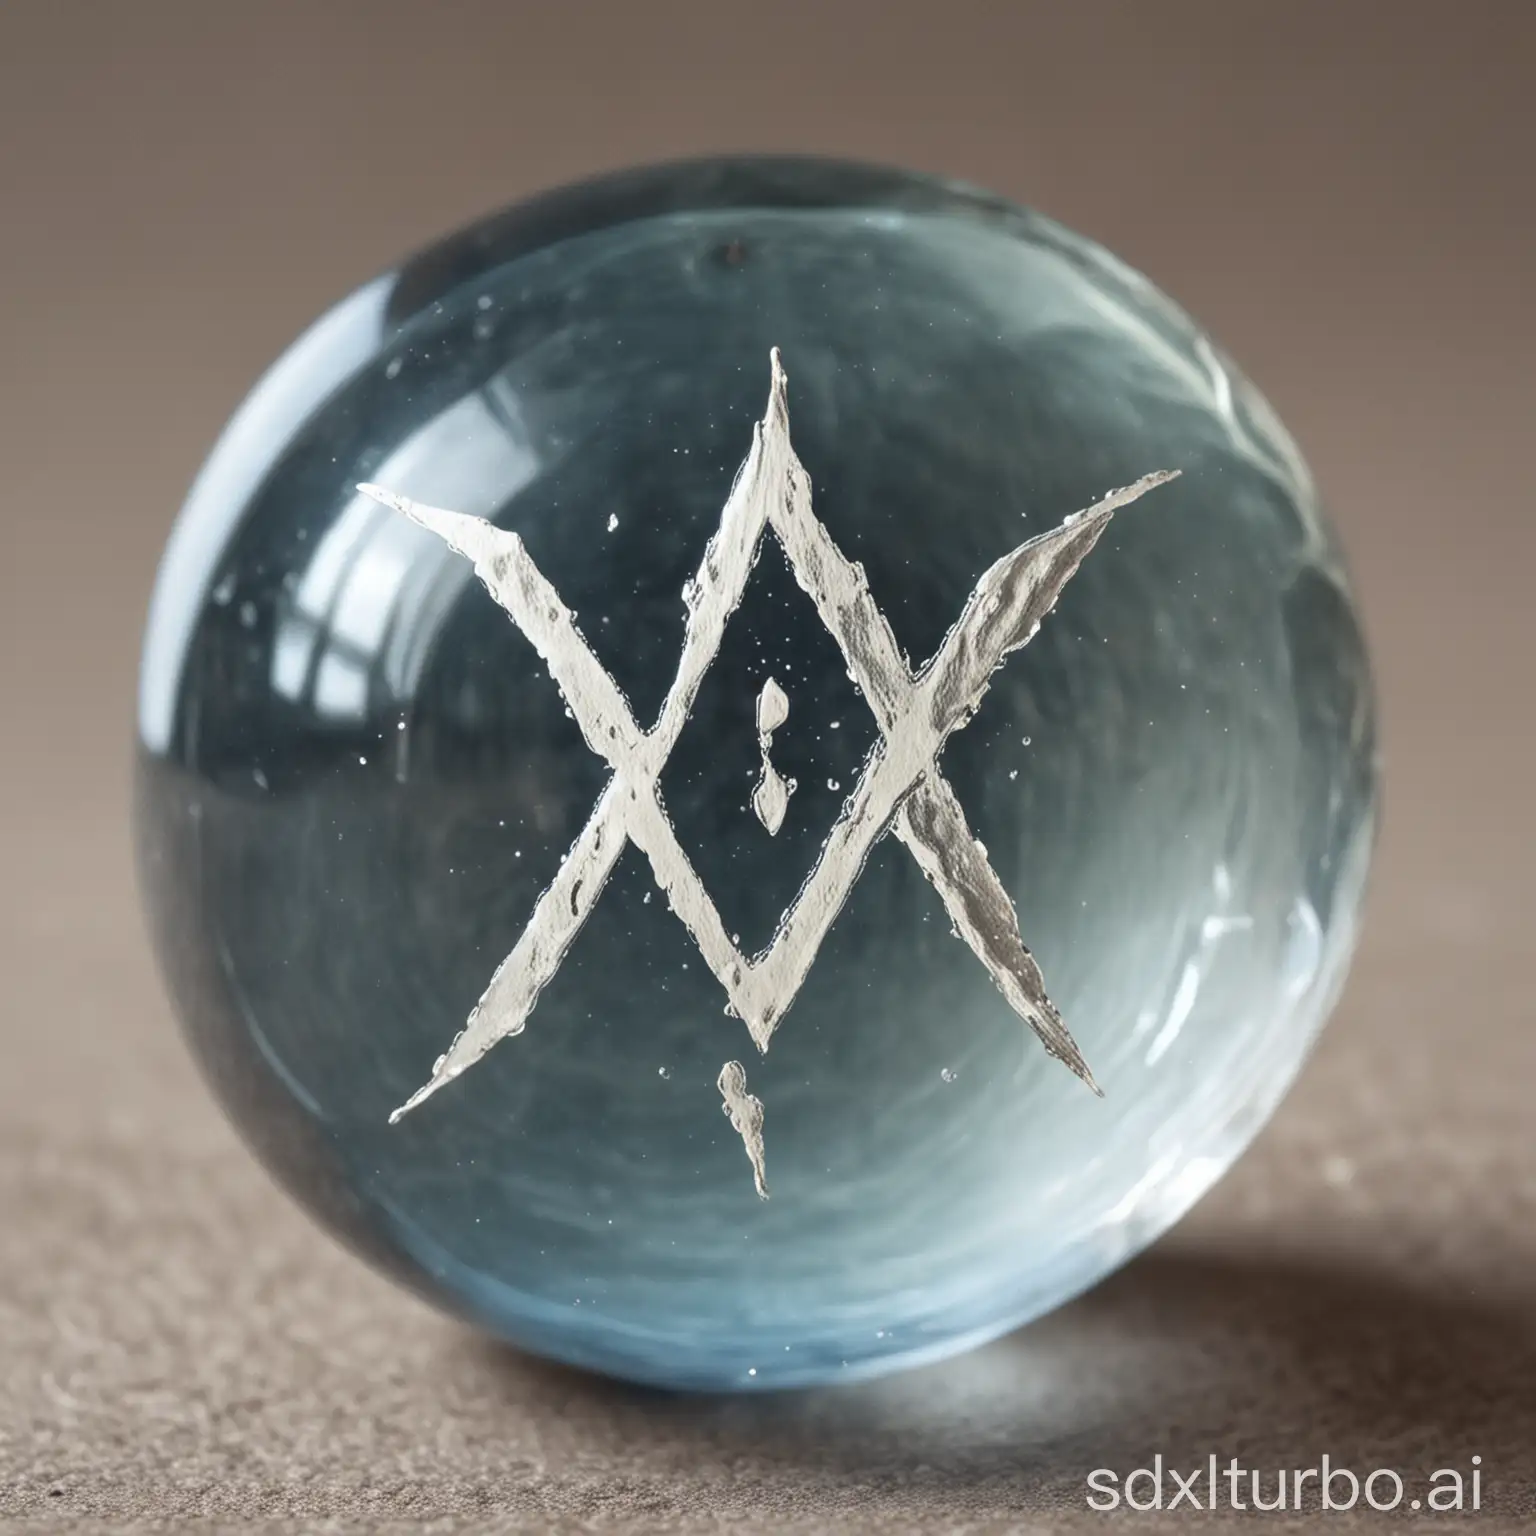 A small circular orb of energy representing a rune of water